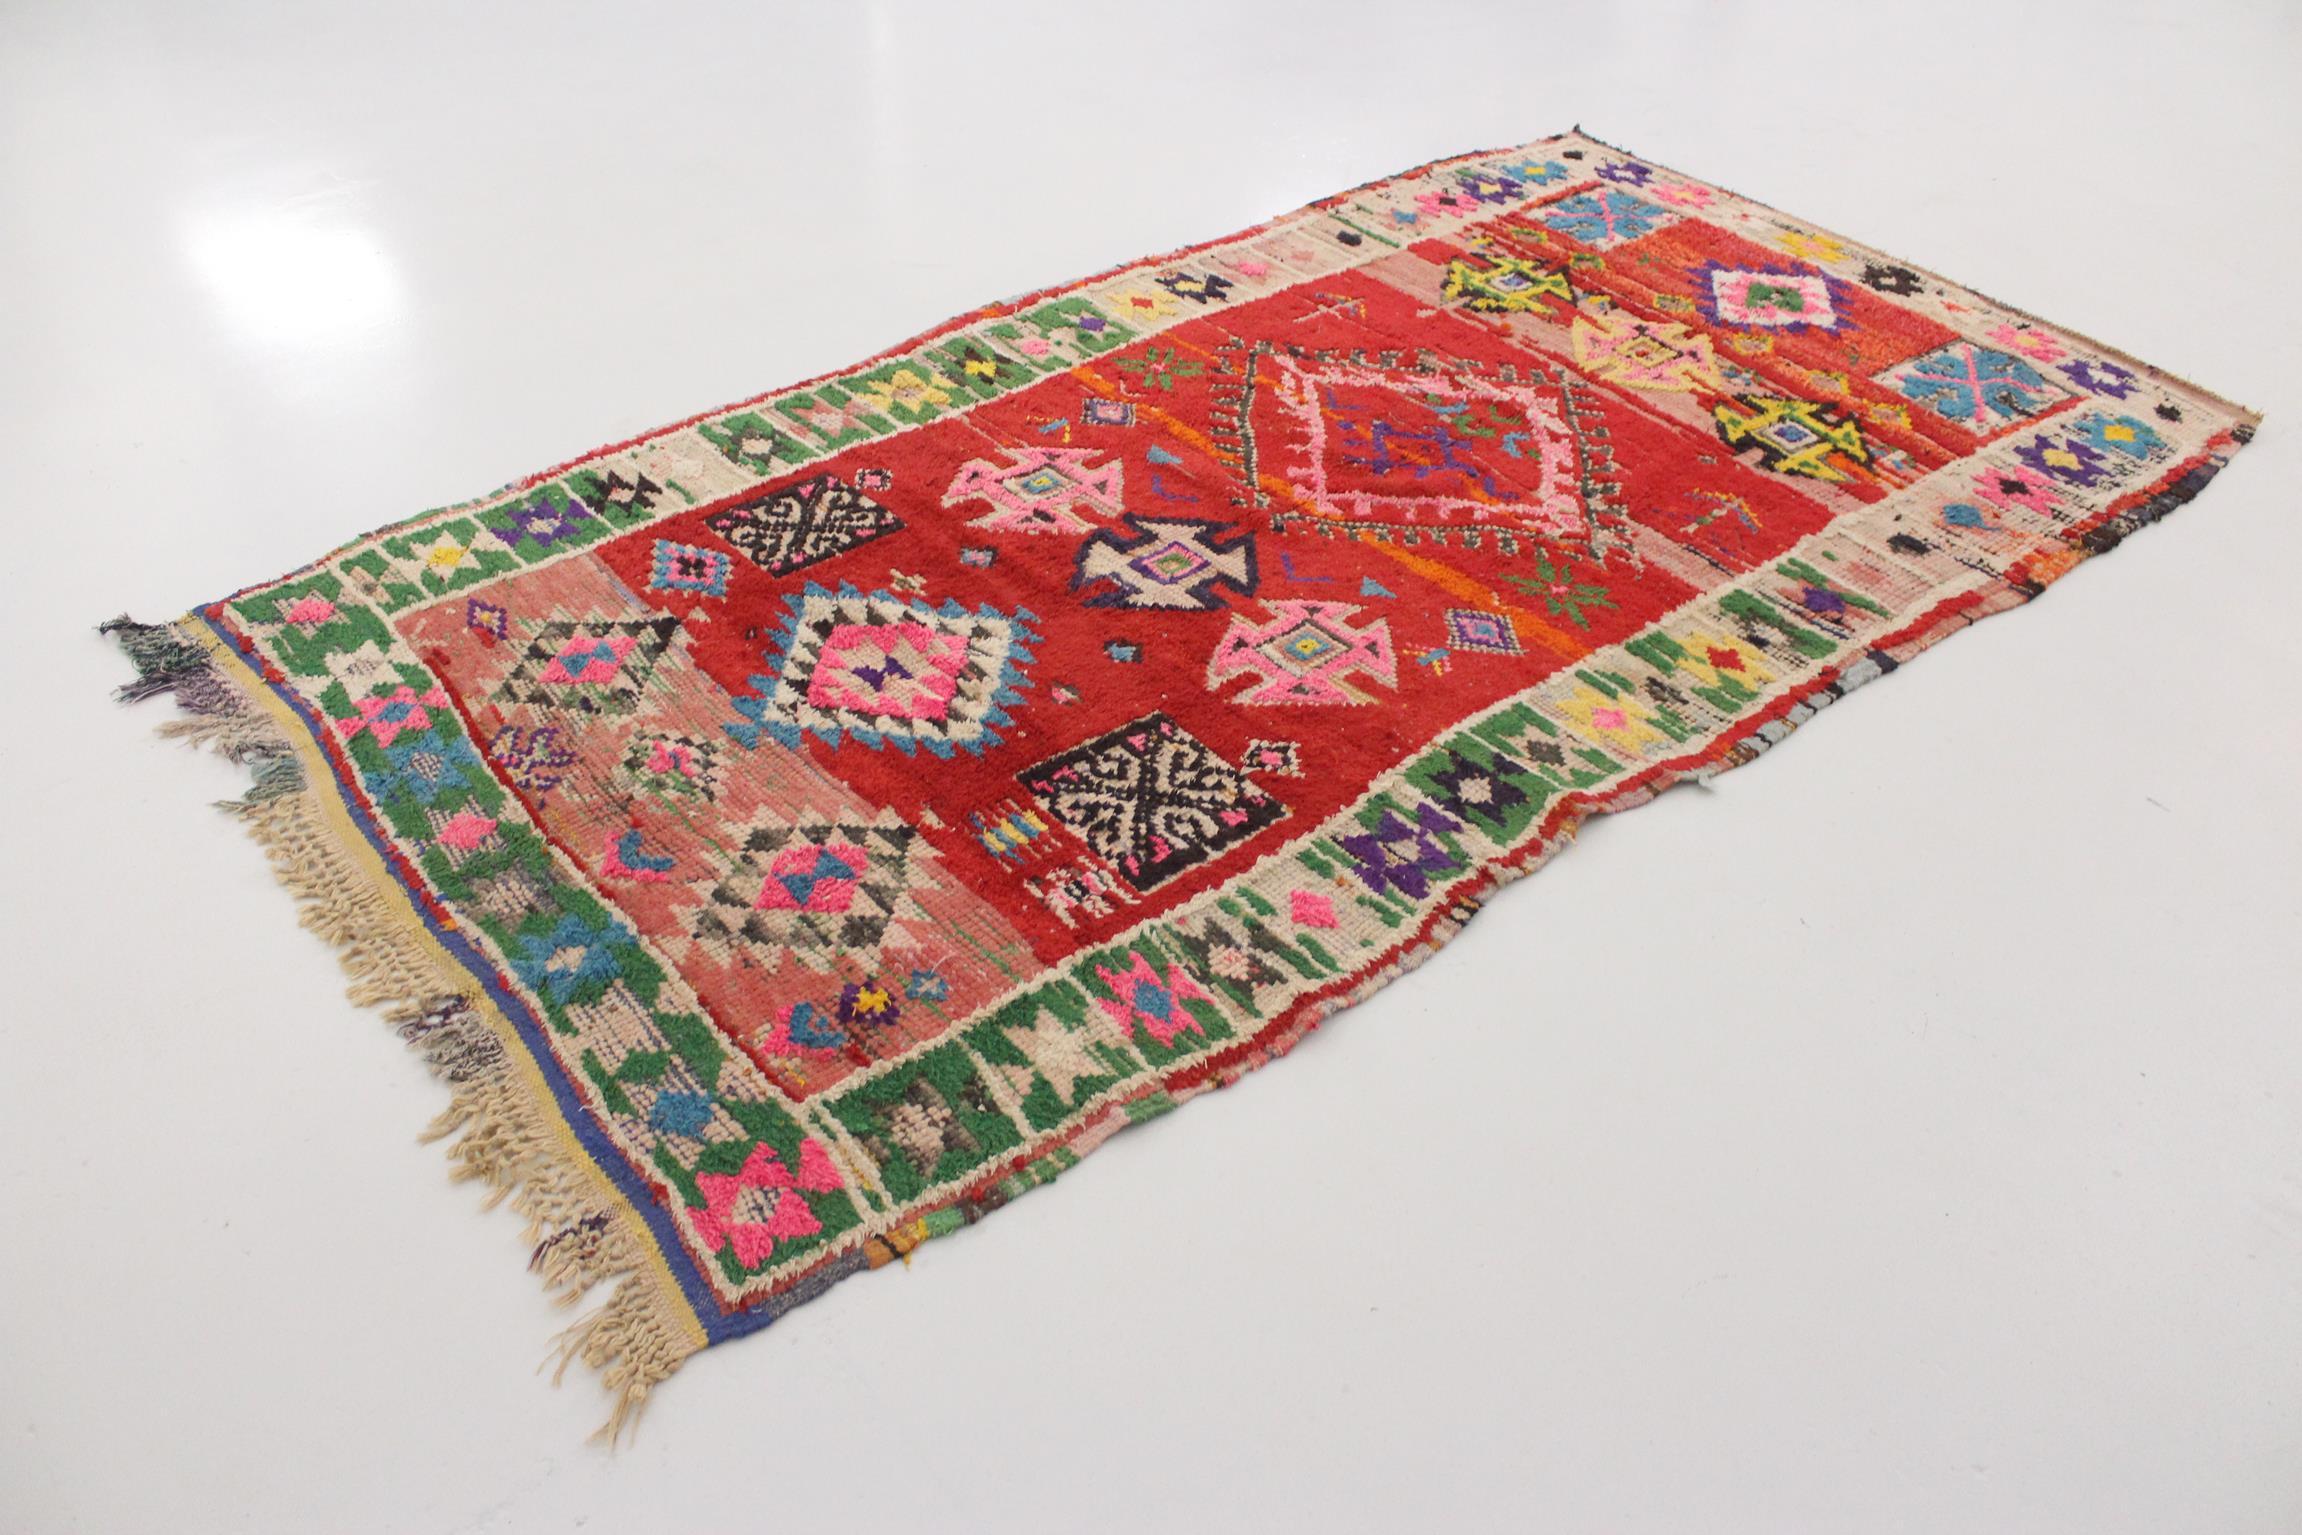 Hand-Woven Vintage Moroccan Boucherouite rug- Red/rainbow - 4-4.6x8.5feet / 123-140x260cm For Sale